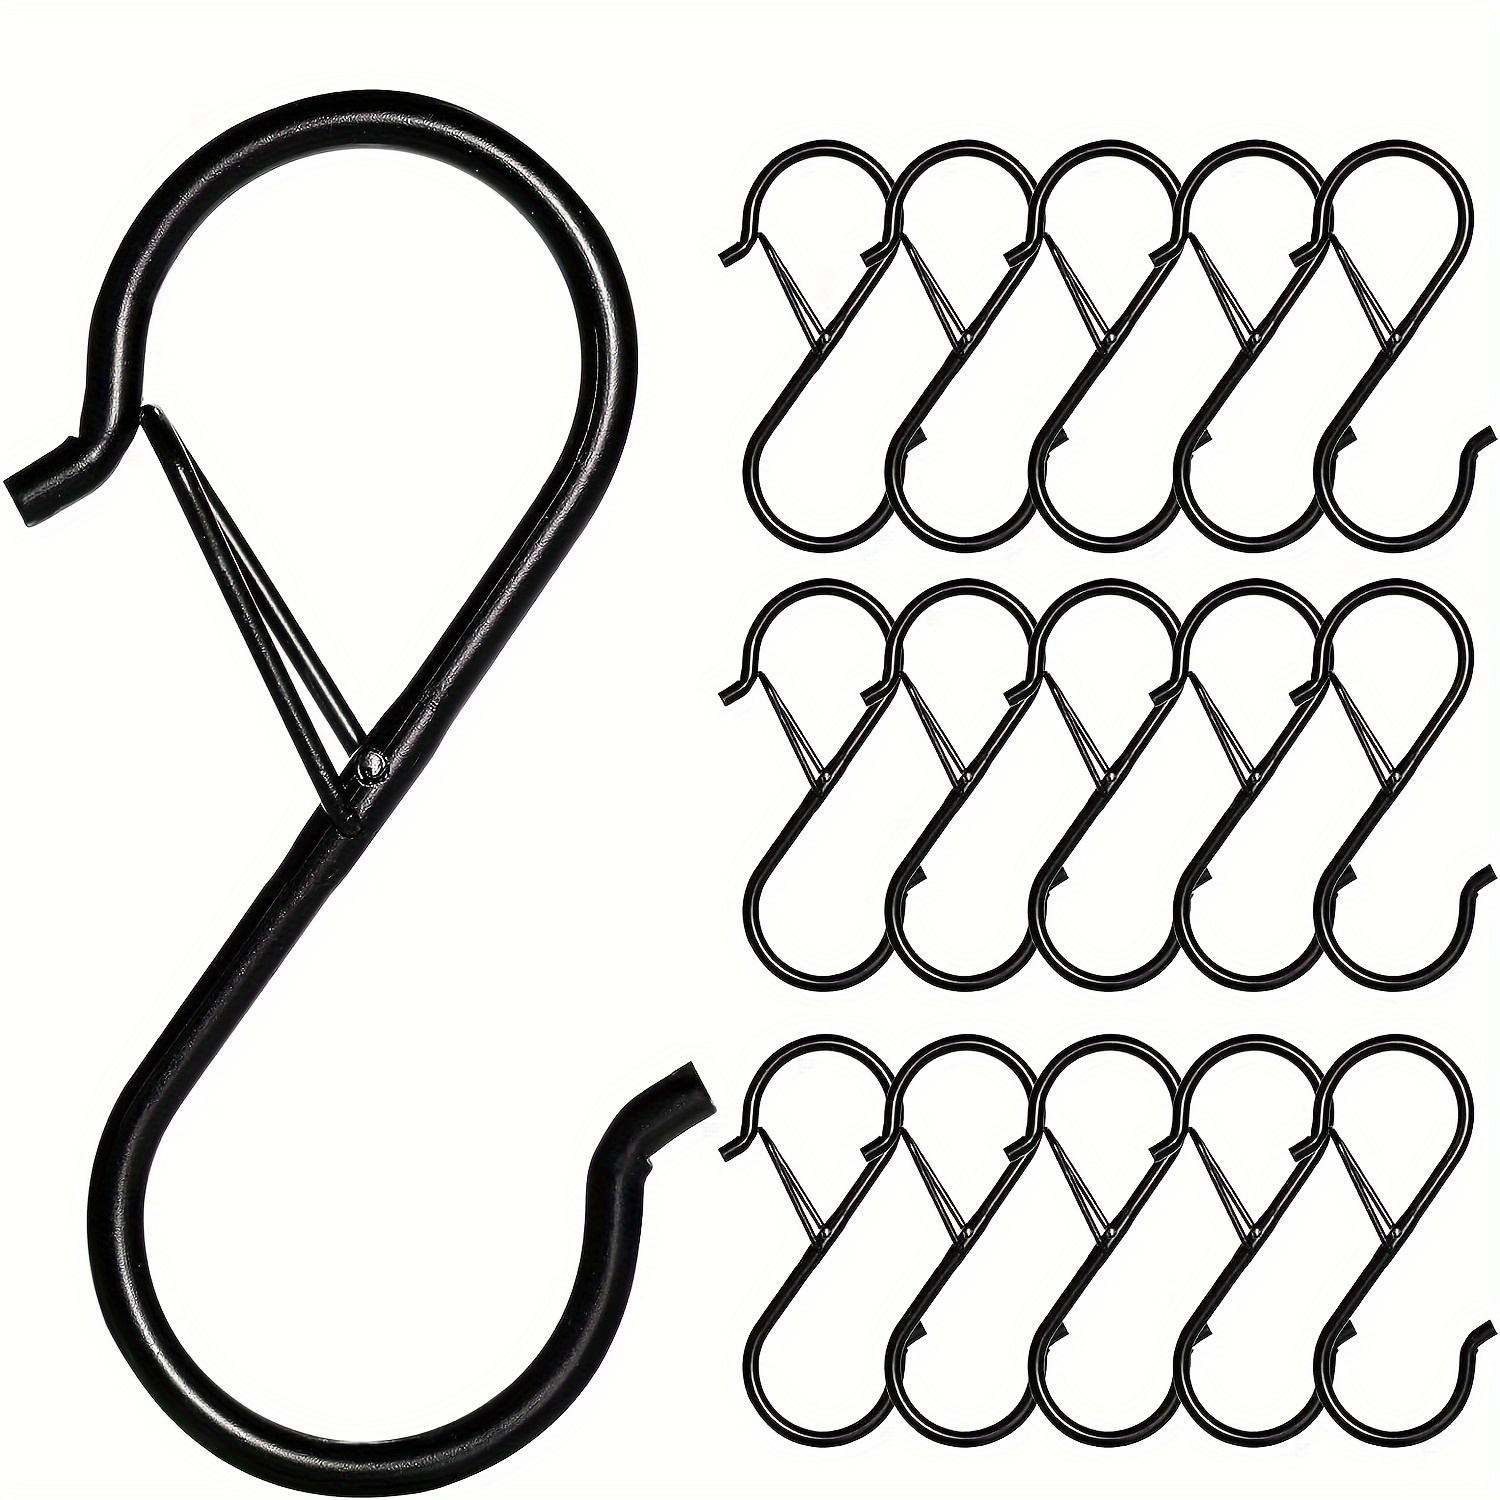 6pcs S Hooks For Hanging, Heavy Duty S-shaped Hooks With Safety Buckle  Design, Kitchen Hooks, Closet Rod S Hooks For Plants, Flower Pots, Towels  And B